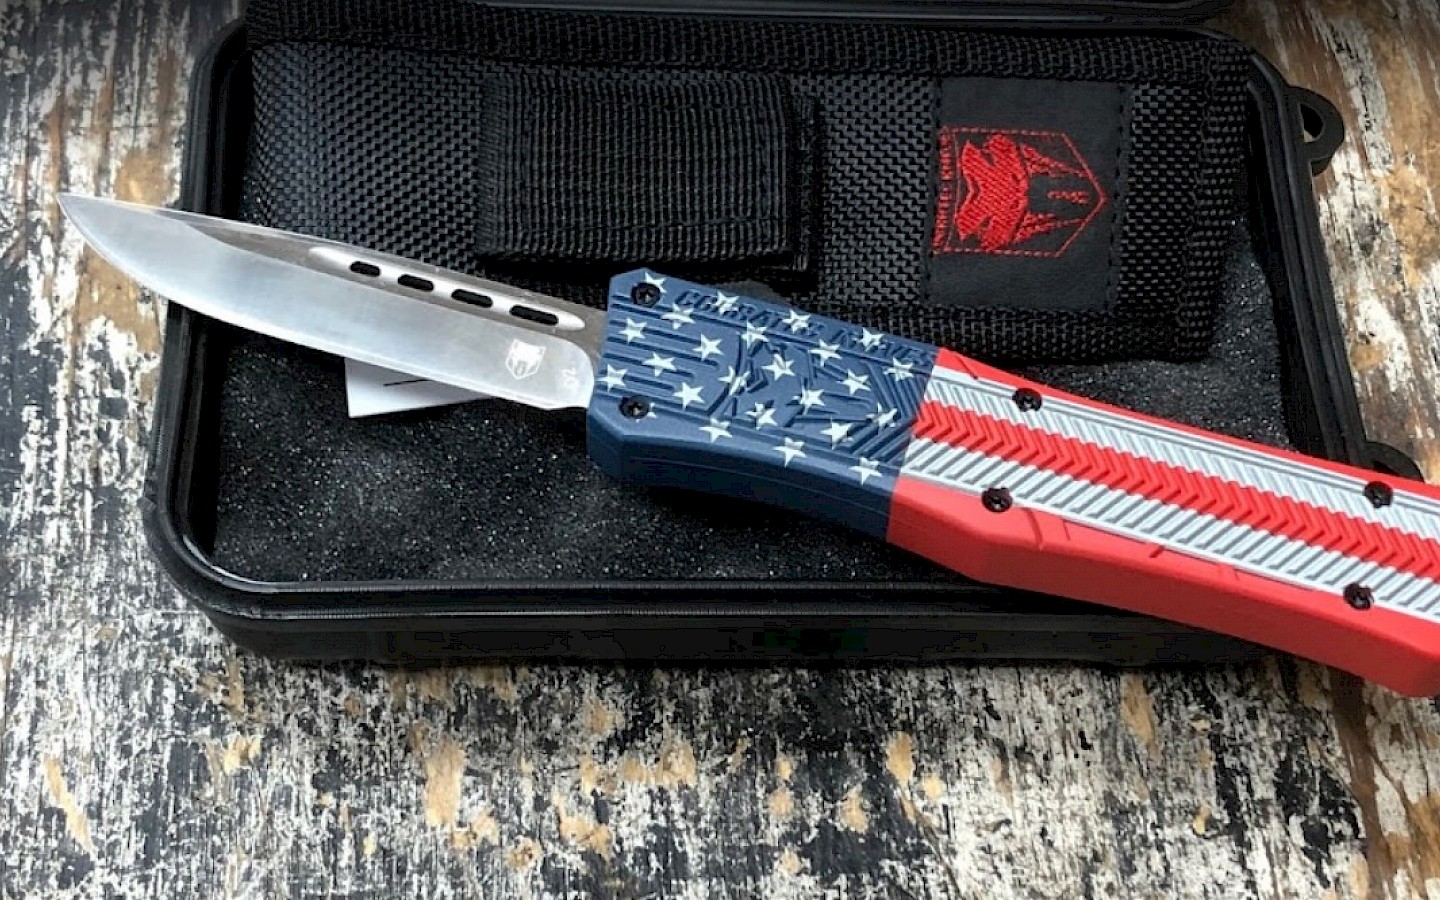 a folding pocket knife with an American flag handle design